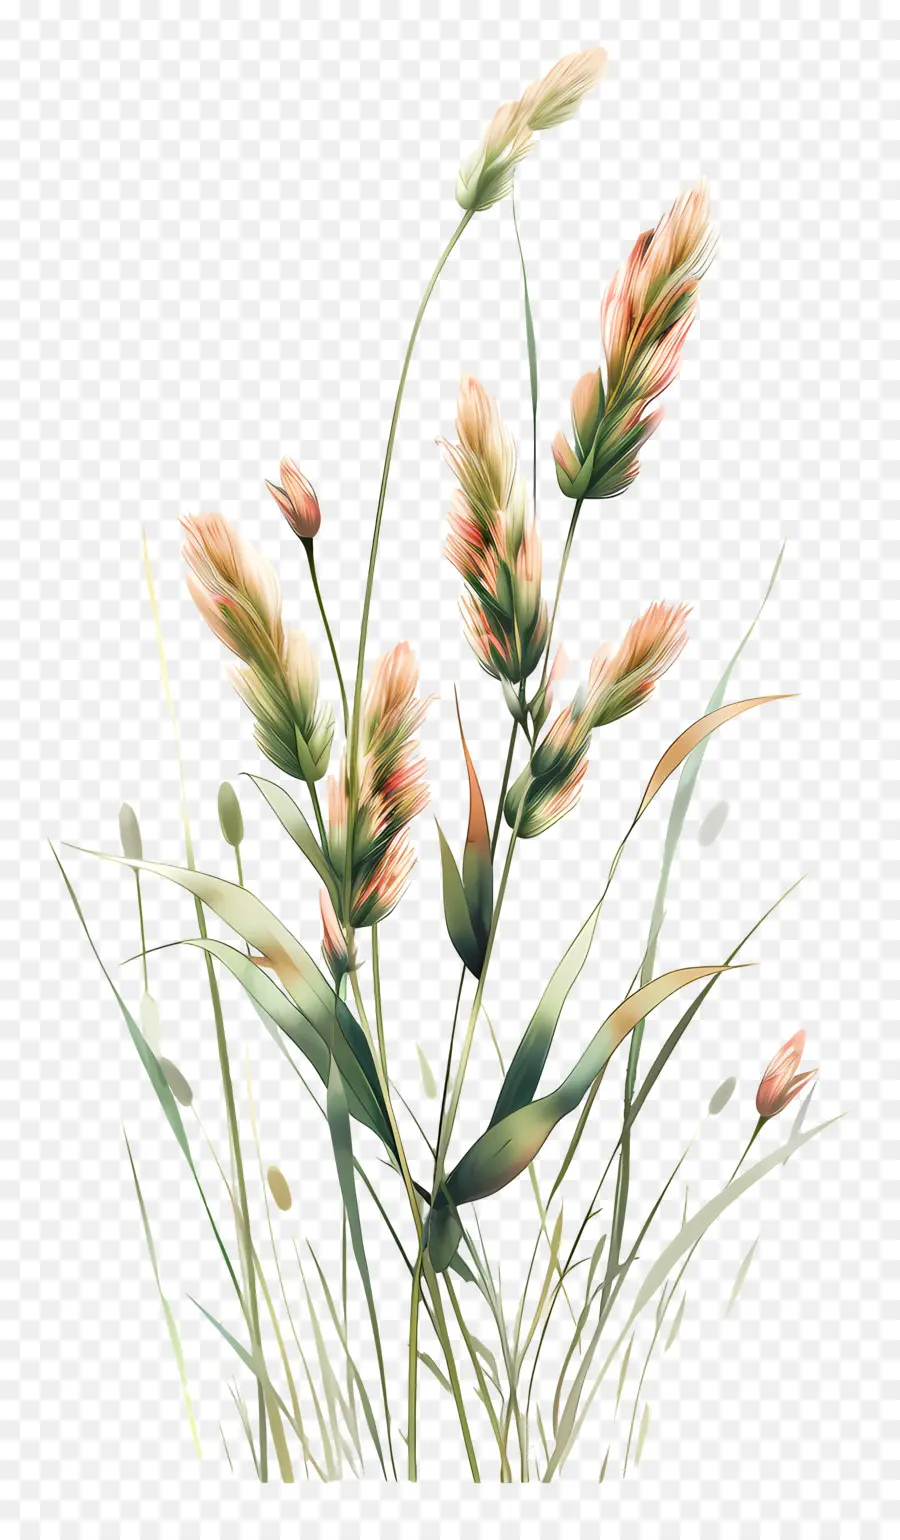 Herbe Fleurie，Fleurs Sauvages PNG